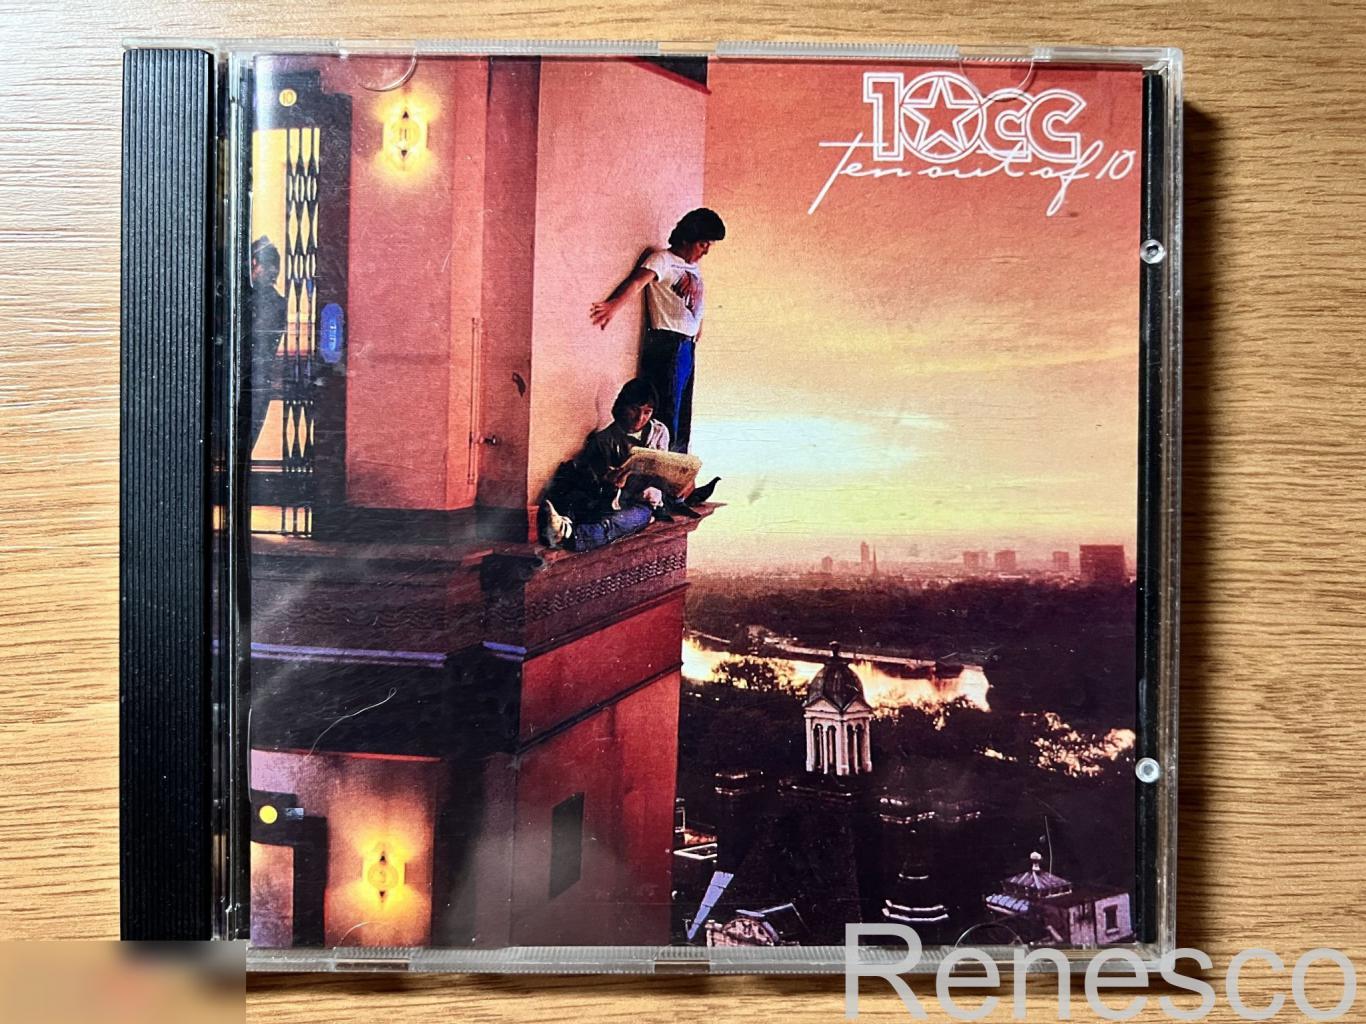 10cc – Ten Out Of 10 (Japan) (1991)